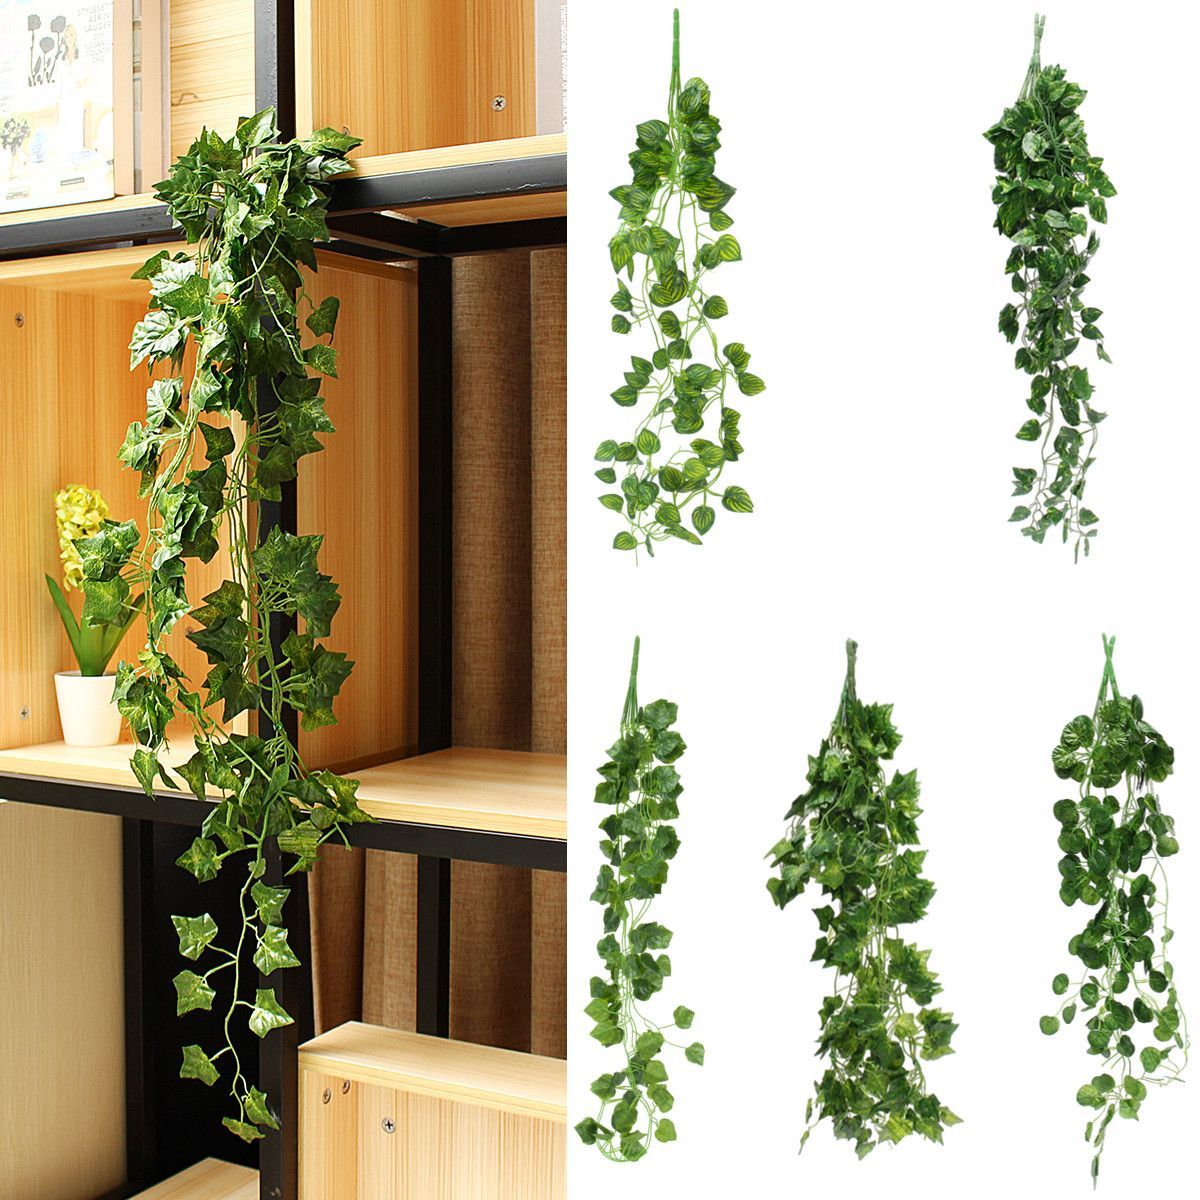 Artificial-Hanging-Plant-Foliage-Leaves-Vine-Garland-Wedding-Home-Cafe-Decor-Supplies-1530237